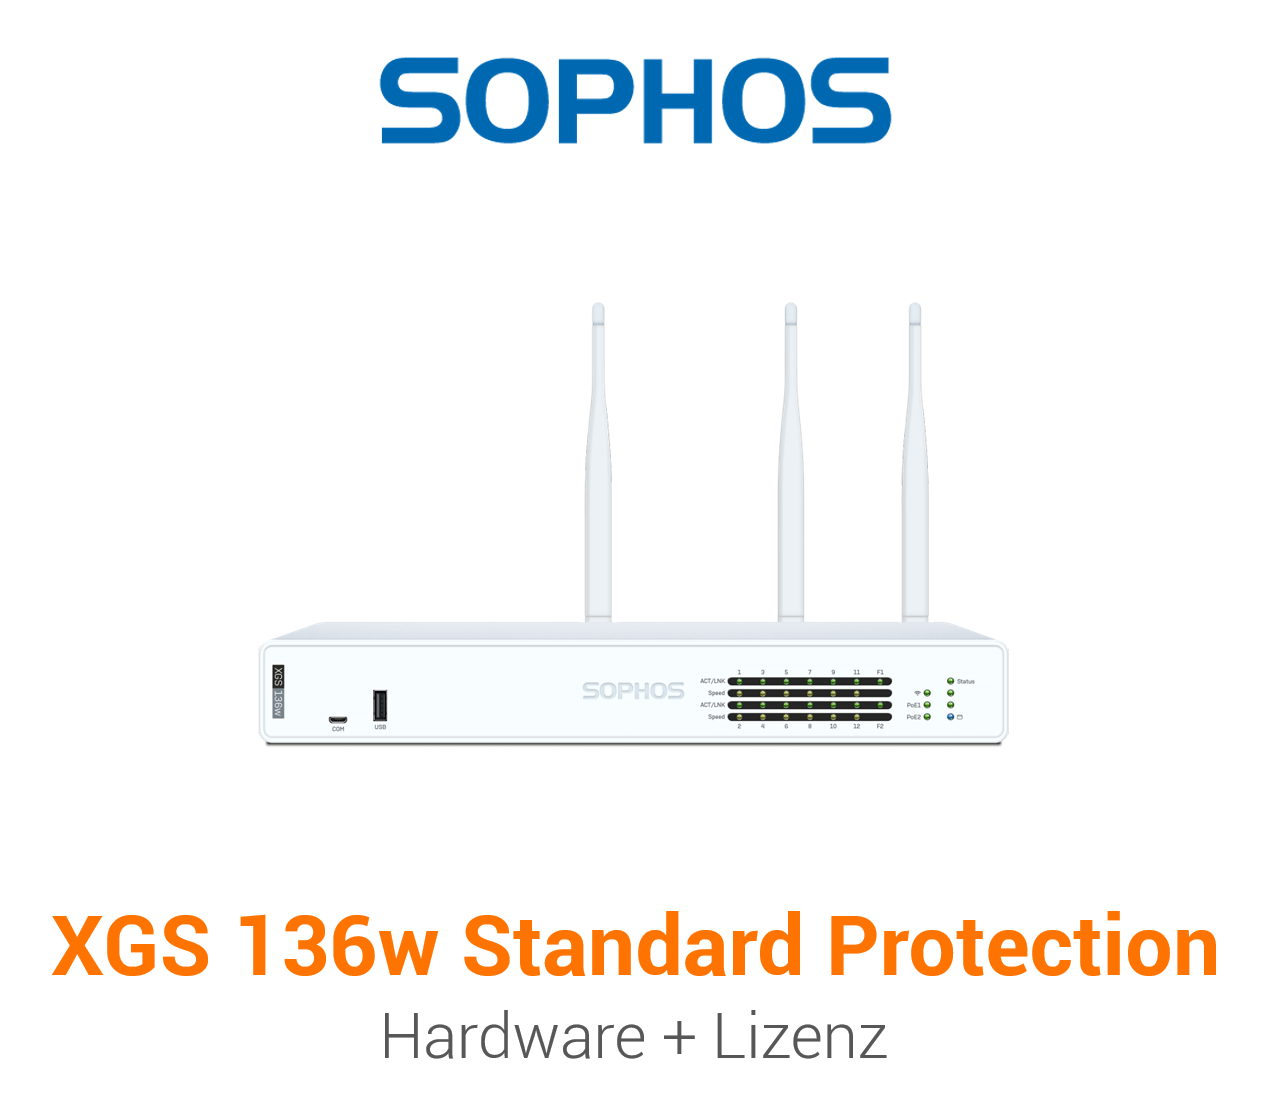 Sophos XGS 136w mit Standard Protection